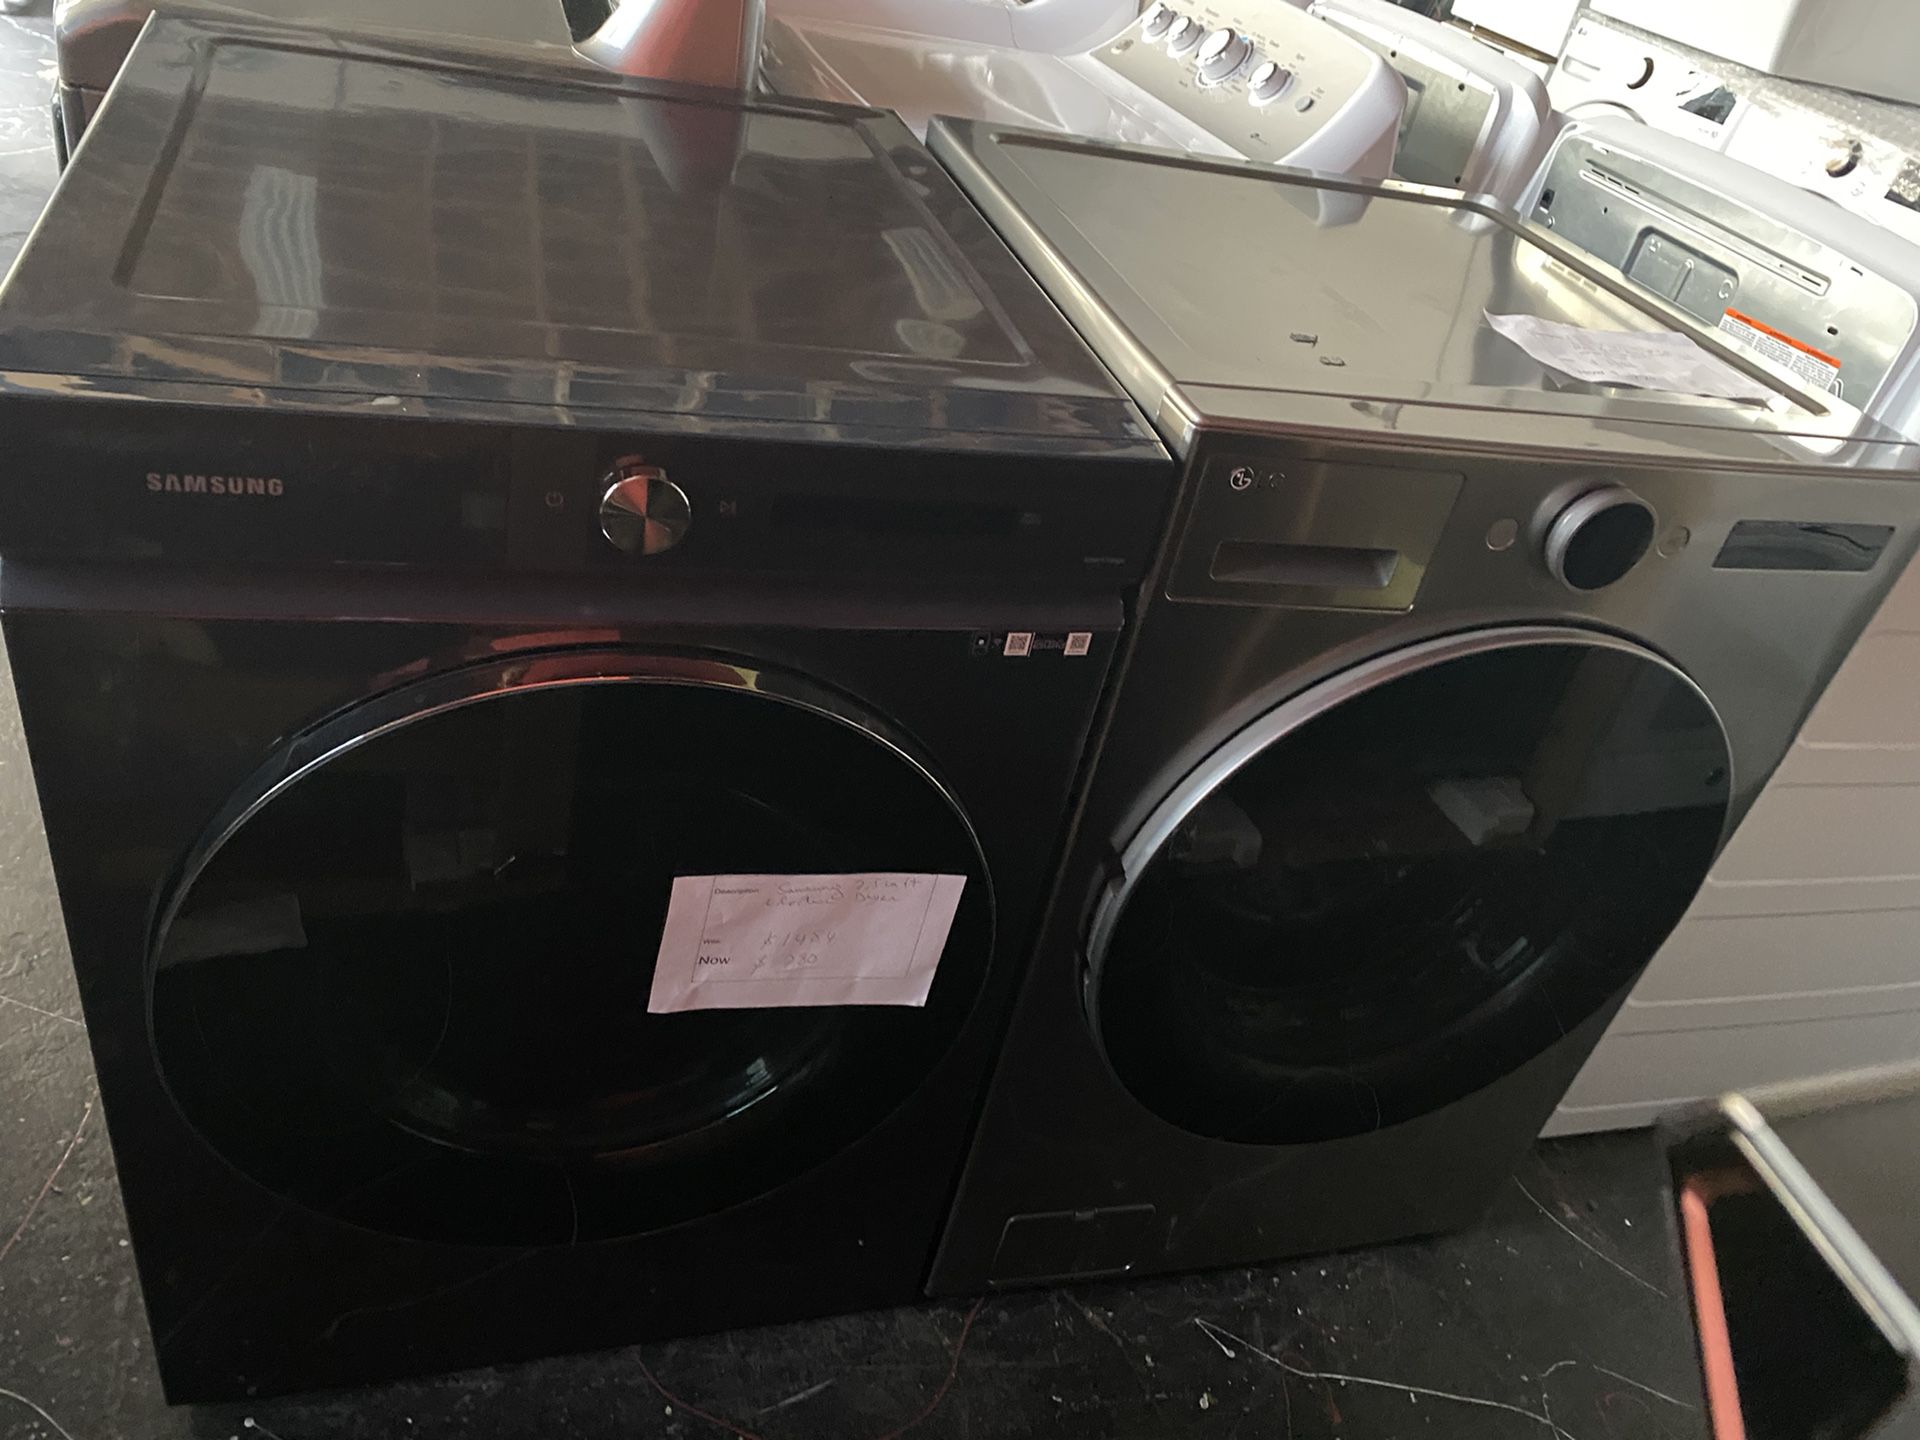 New LG Washer And Samsung Electric Dryer 